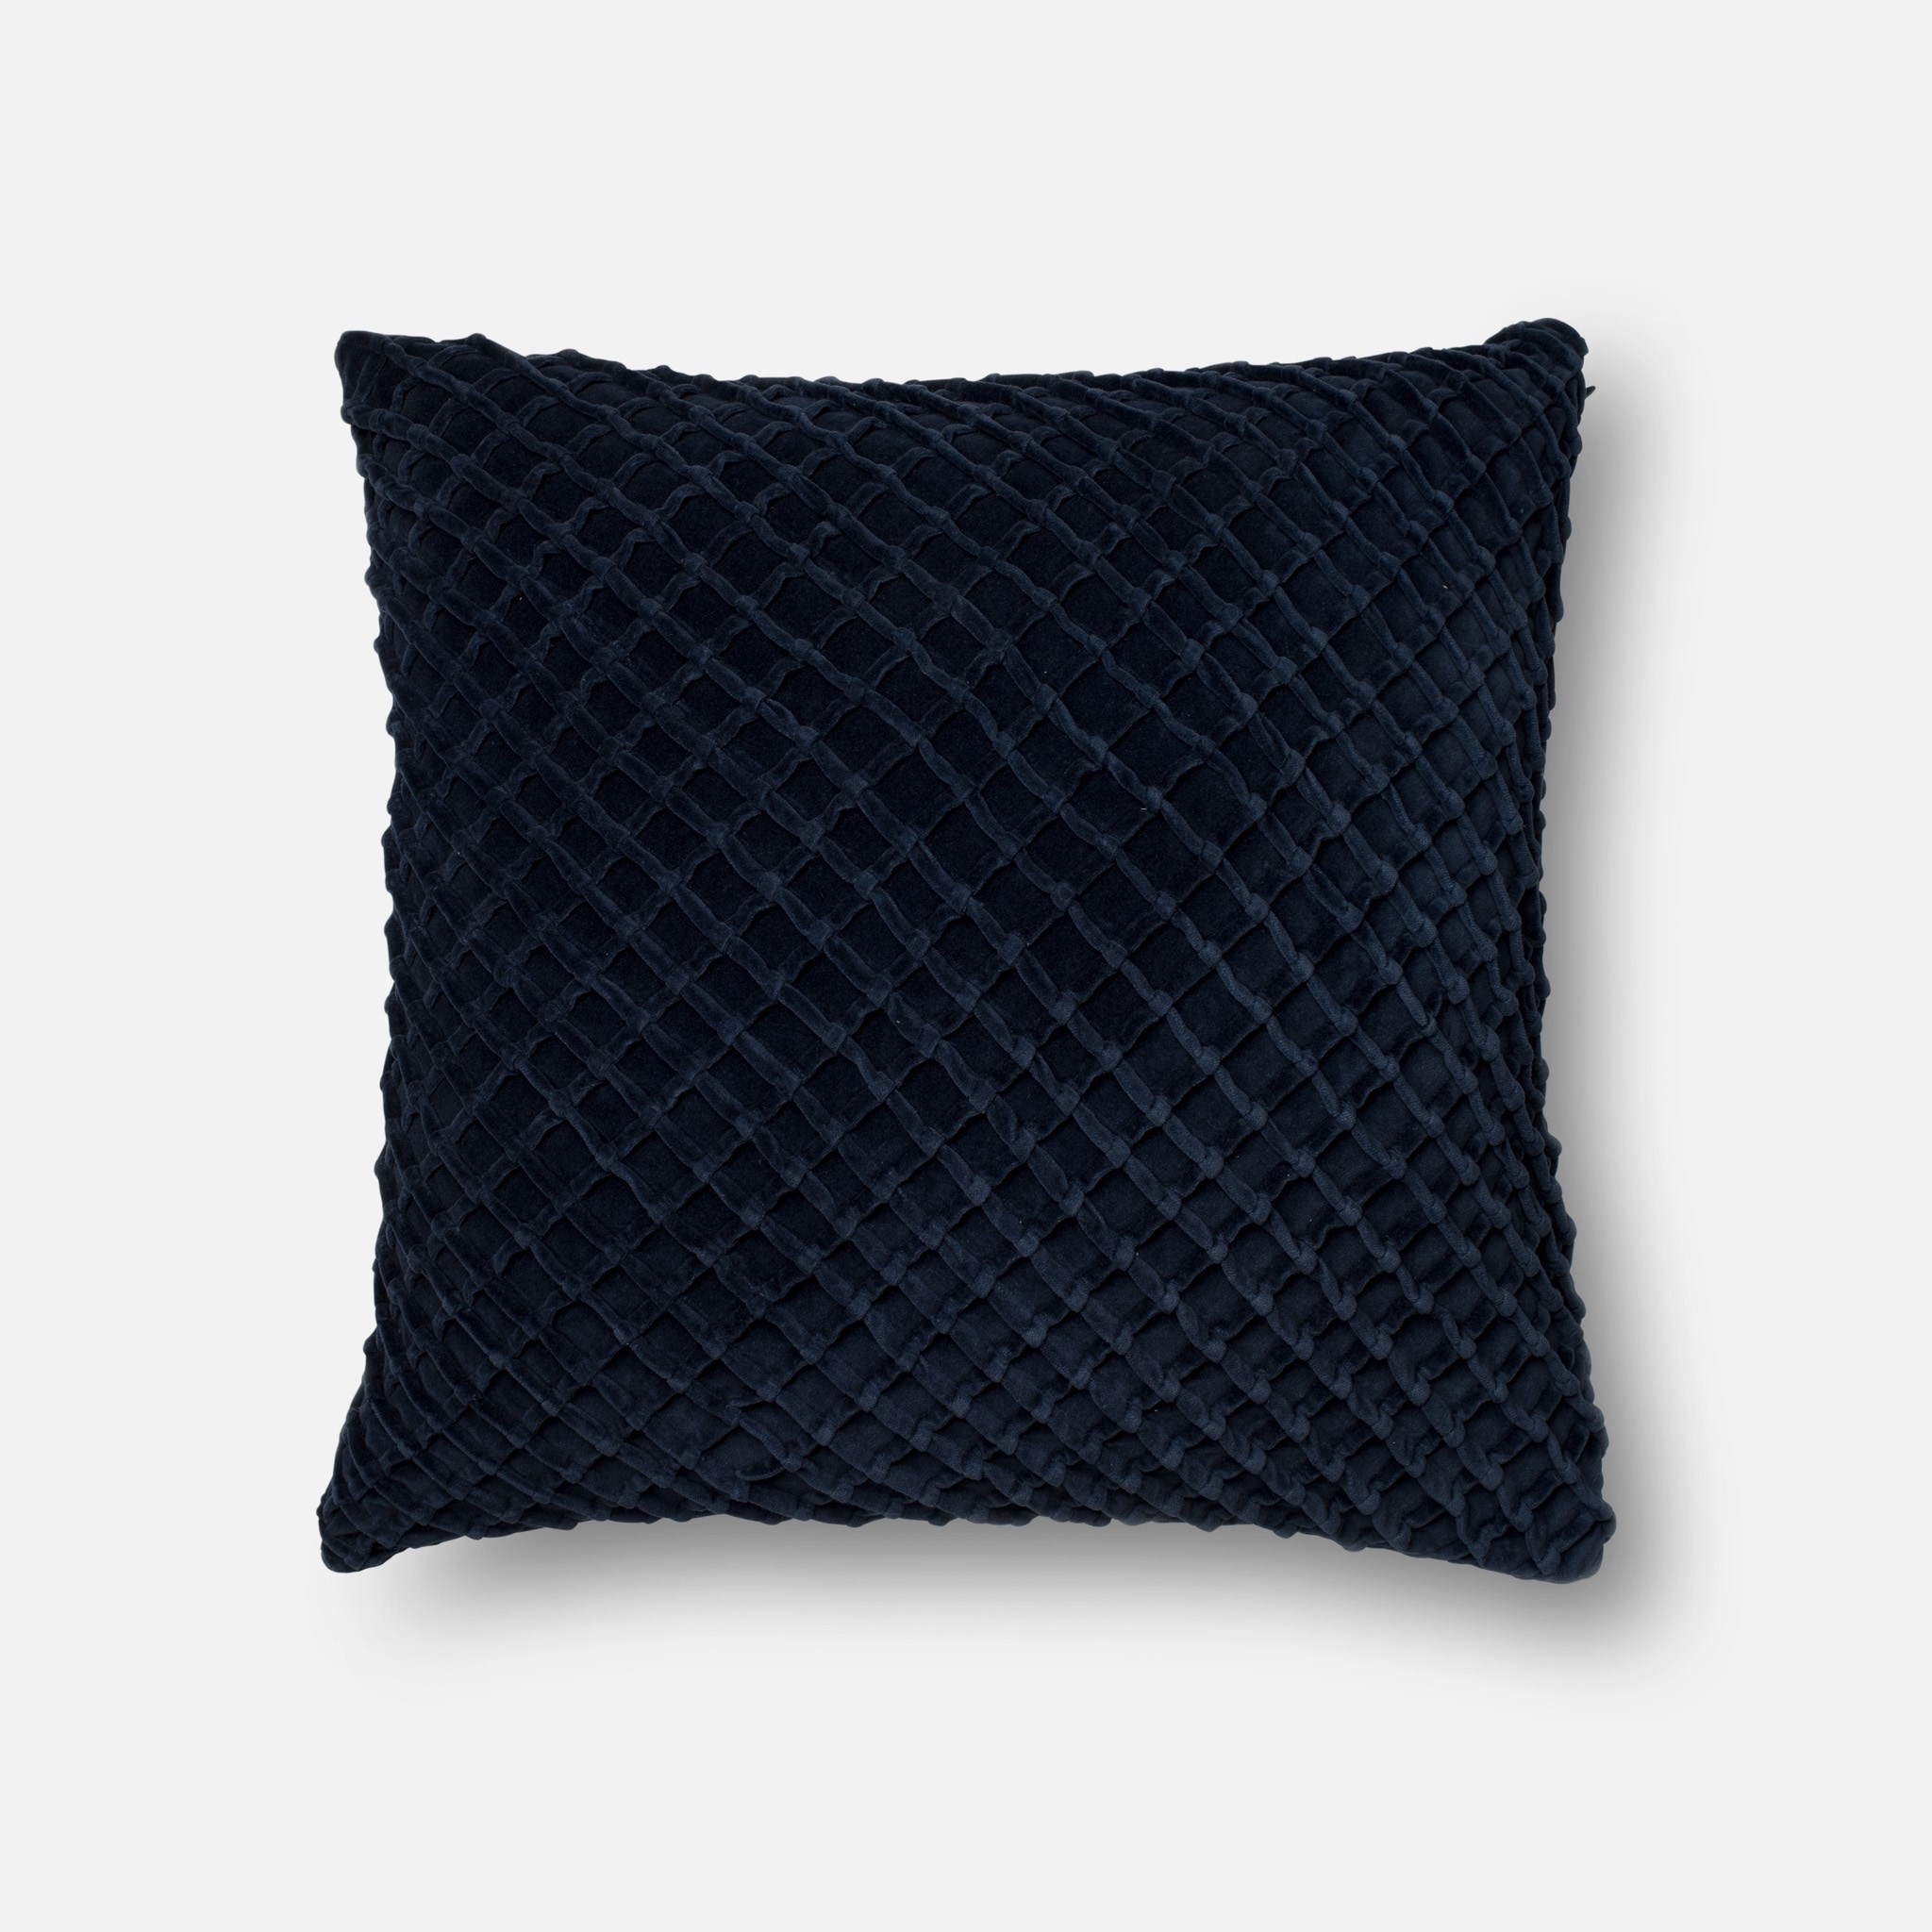 P0125 Navy Pillow - 22x22 - with insert - Image 0